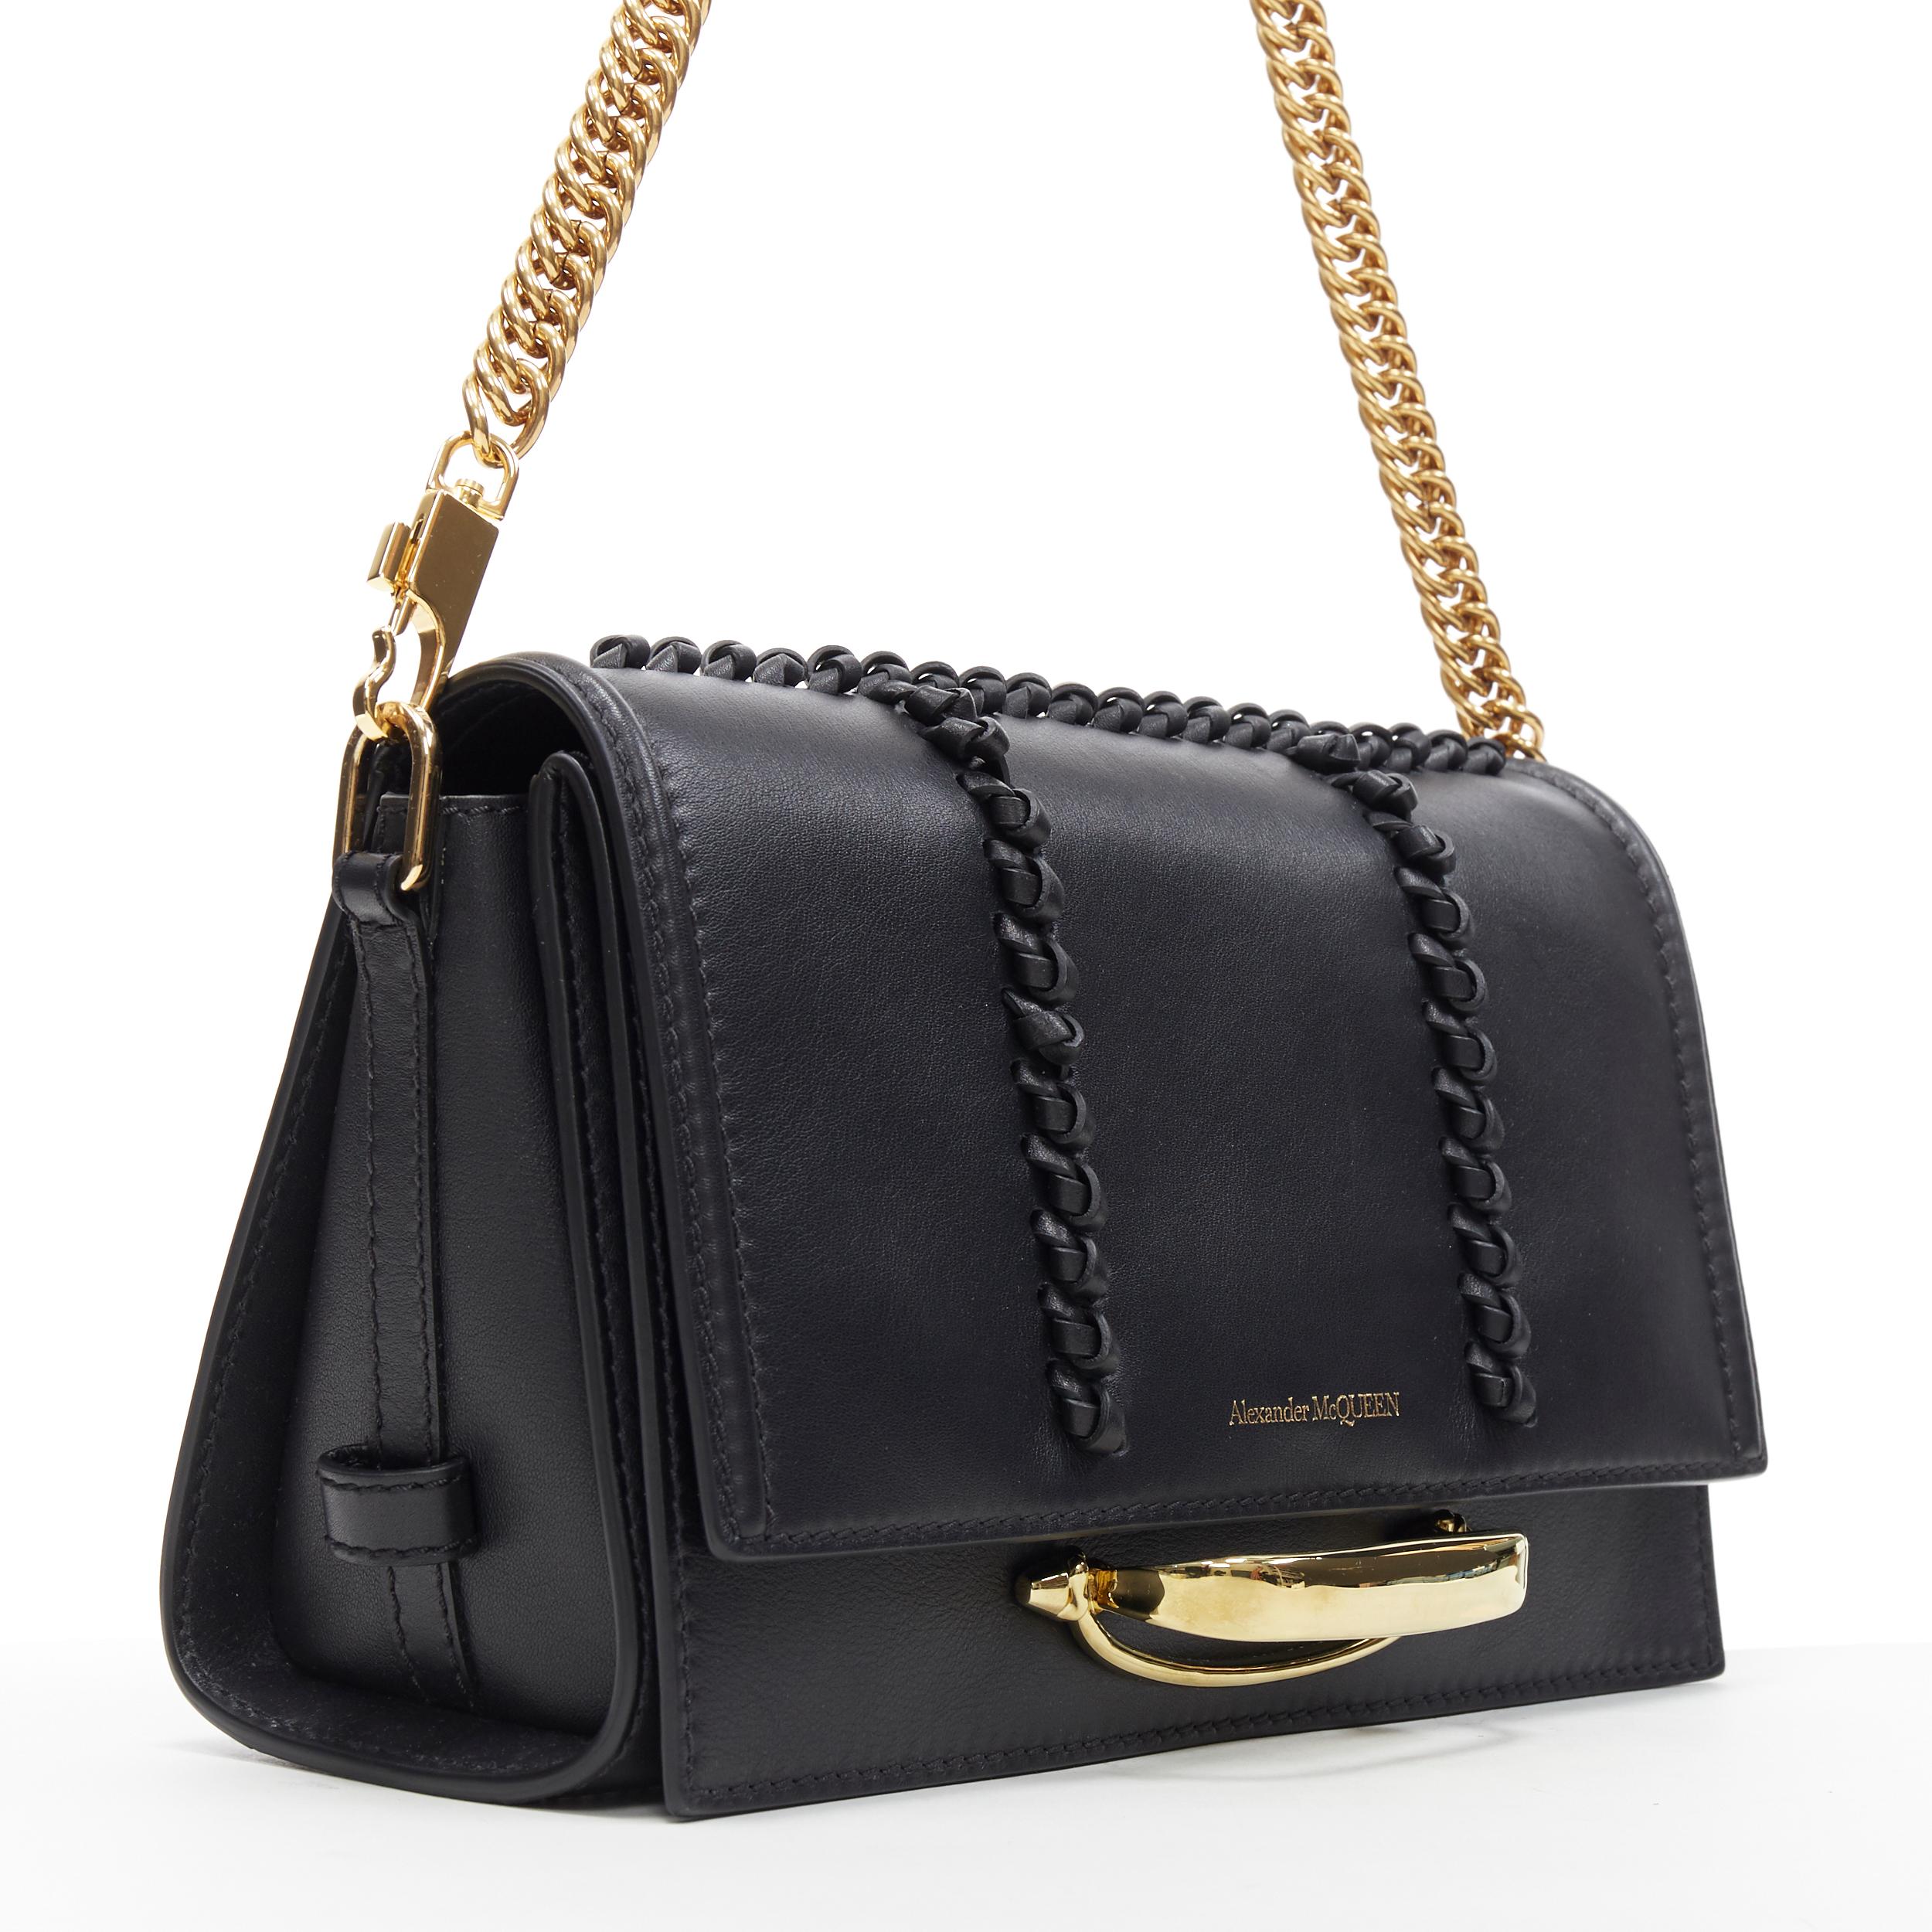 new ALEXANDER MCQUEEN The Story black leather whipstitch gold knuckle chain bag
Brand: Alexander Mcqueen
Model Name / Style: The Story
Material: Leather
Color: Black
Pattern: Solid
Closure: Magnetic
Extra Detail: Black leather Alexander McQueen The